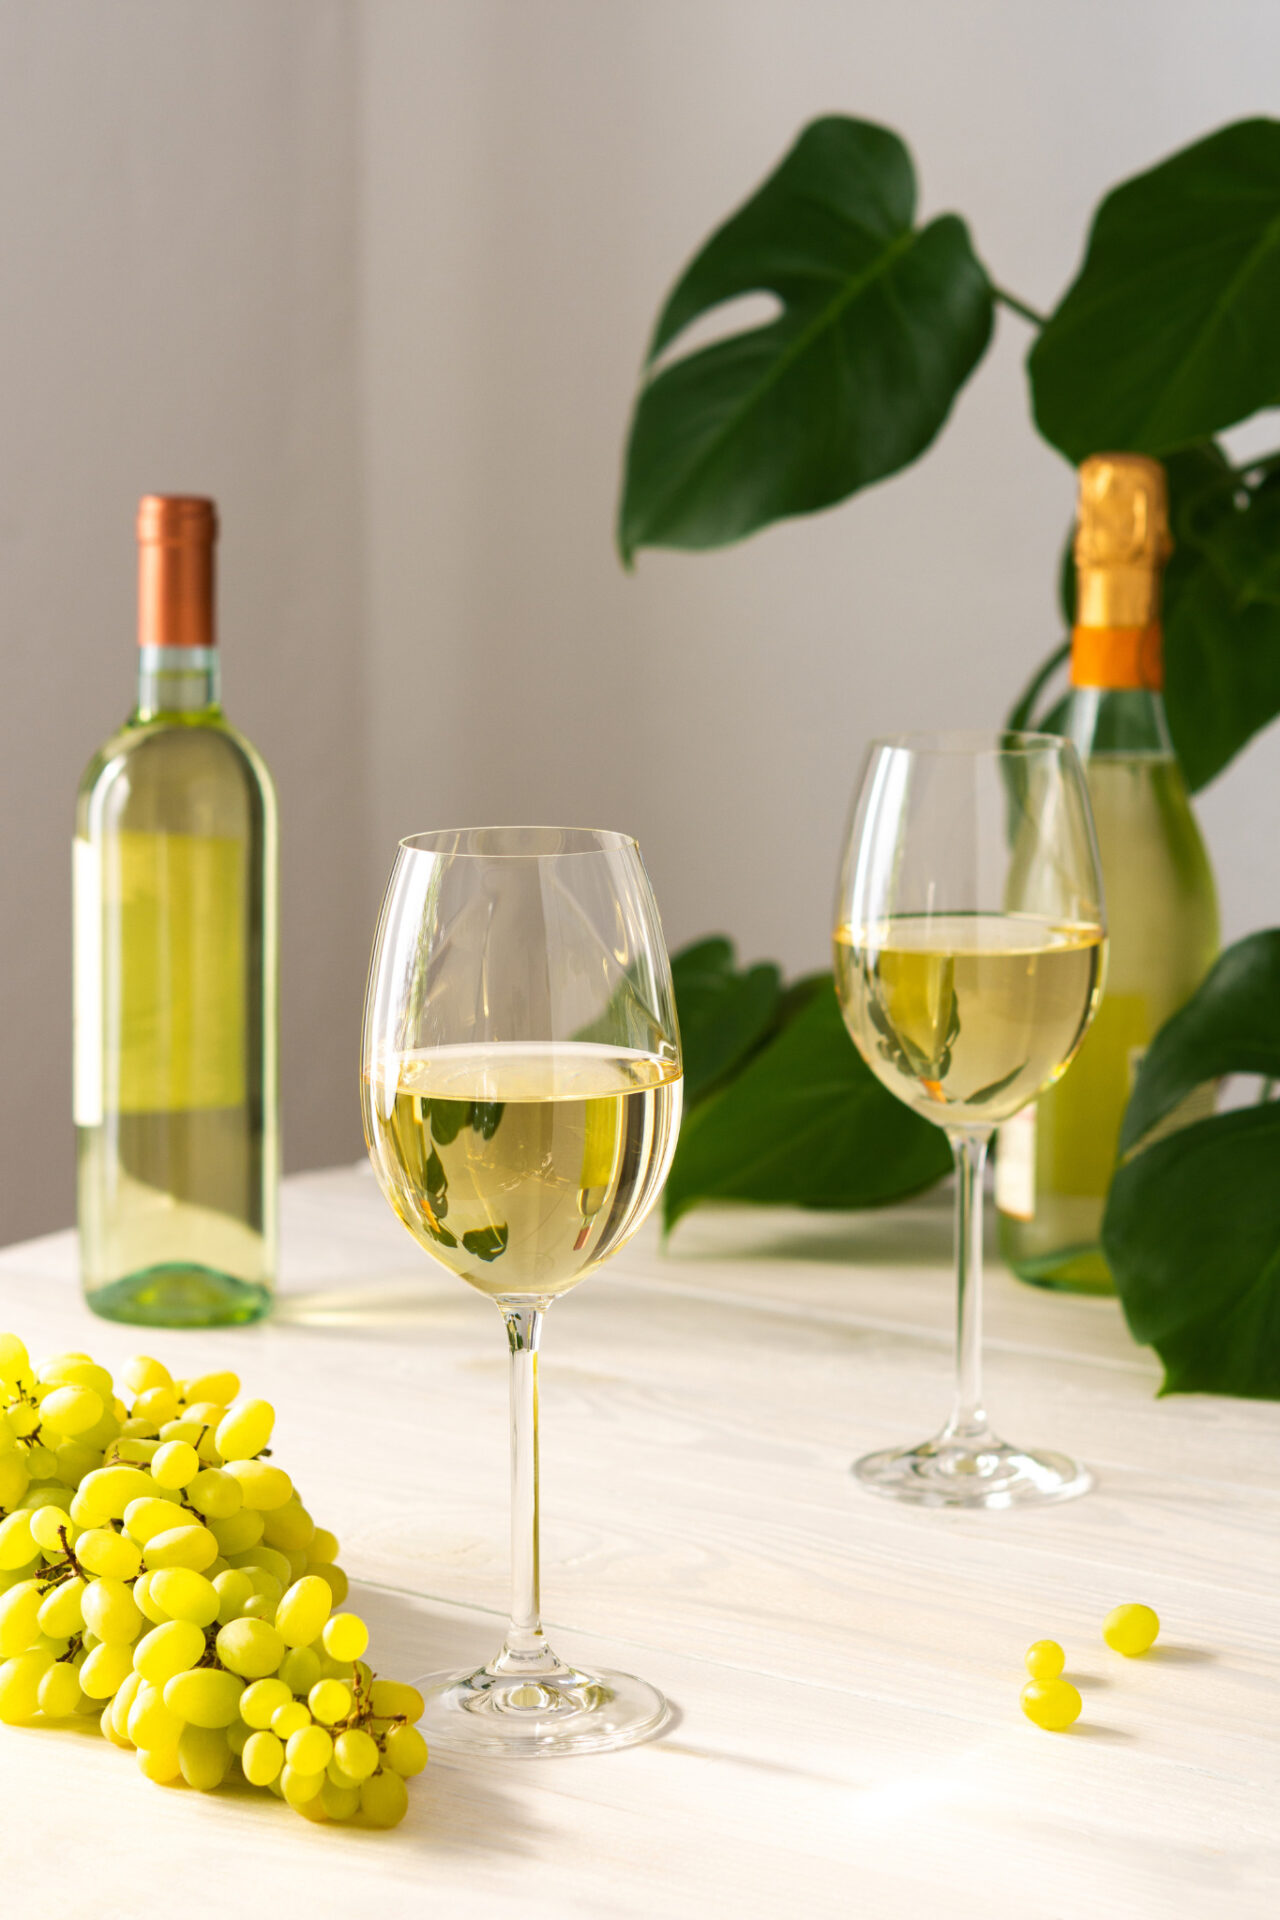 Two glasses and two bottles of Sauvignon Blanc calories with grapes on table